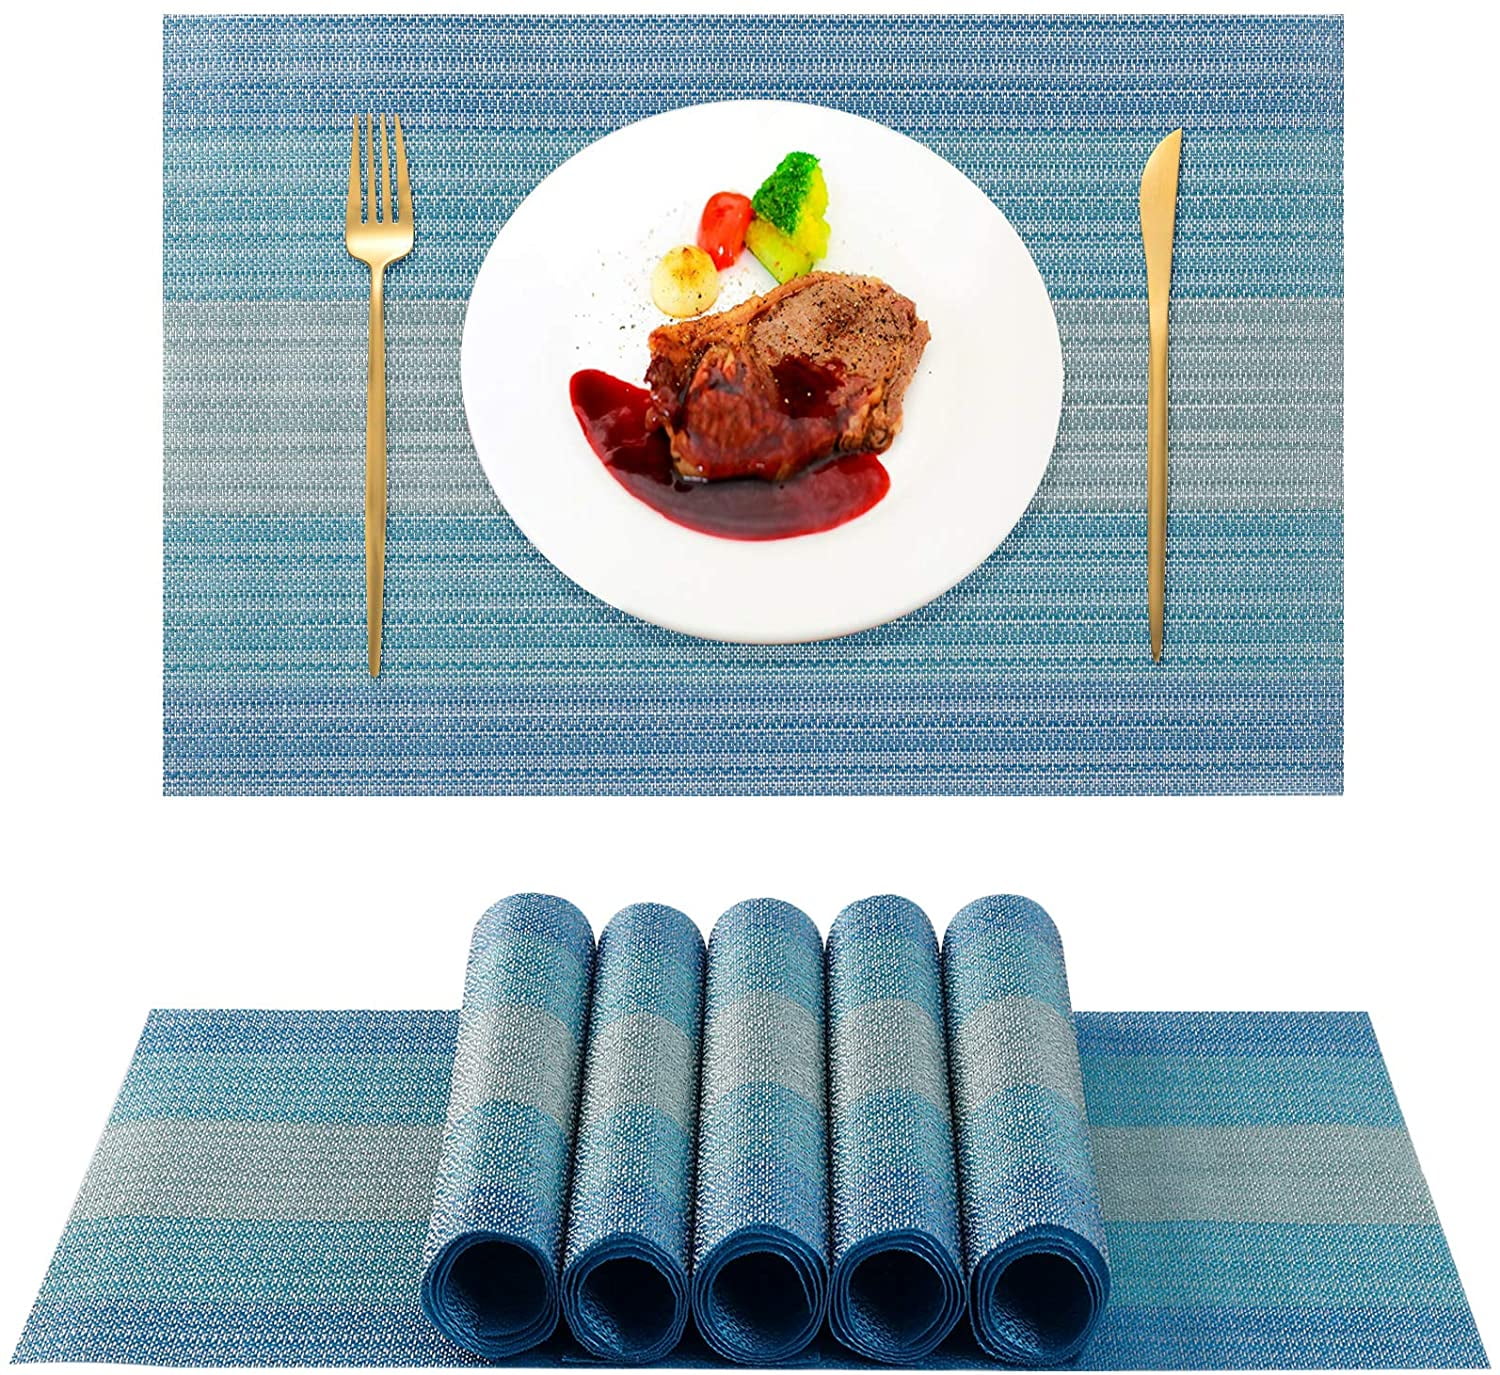 Placemats Set of 6 Dinner Table Mats Washable Non Slip Woven 17.7in*11.8in Gray 